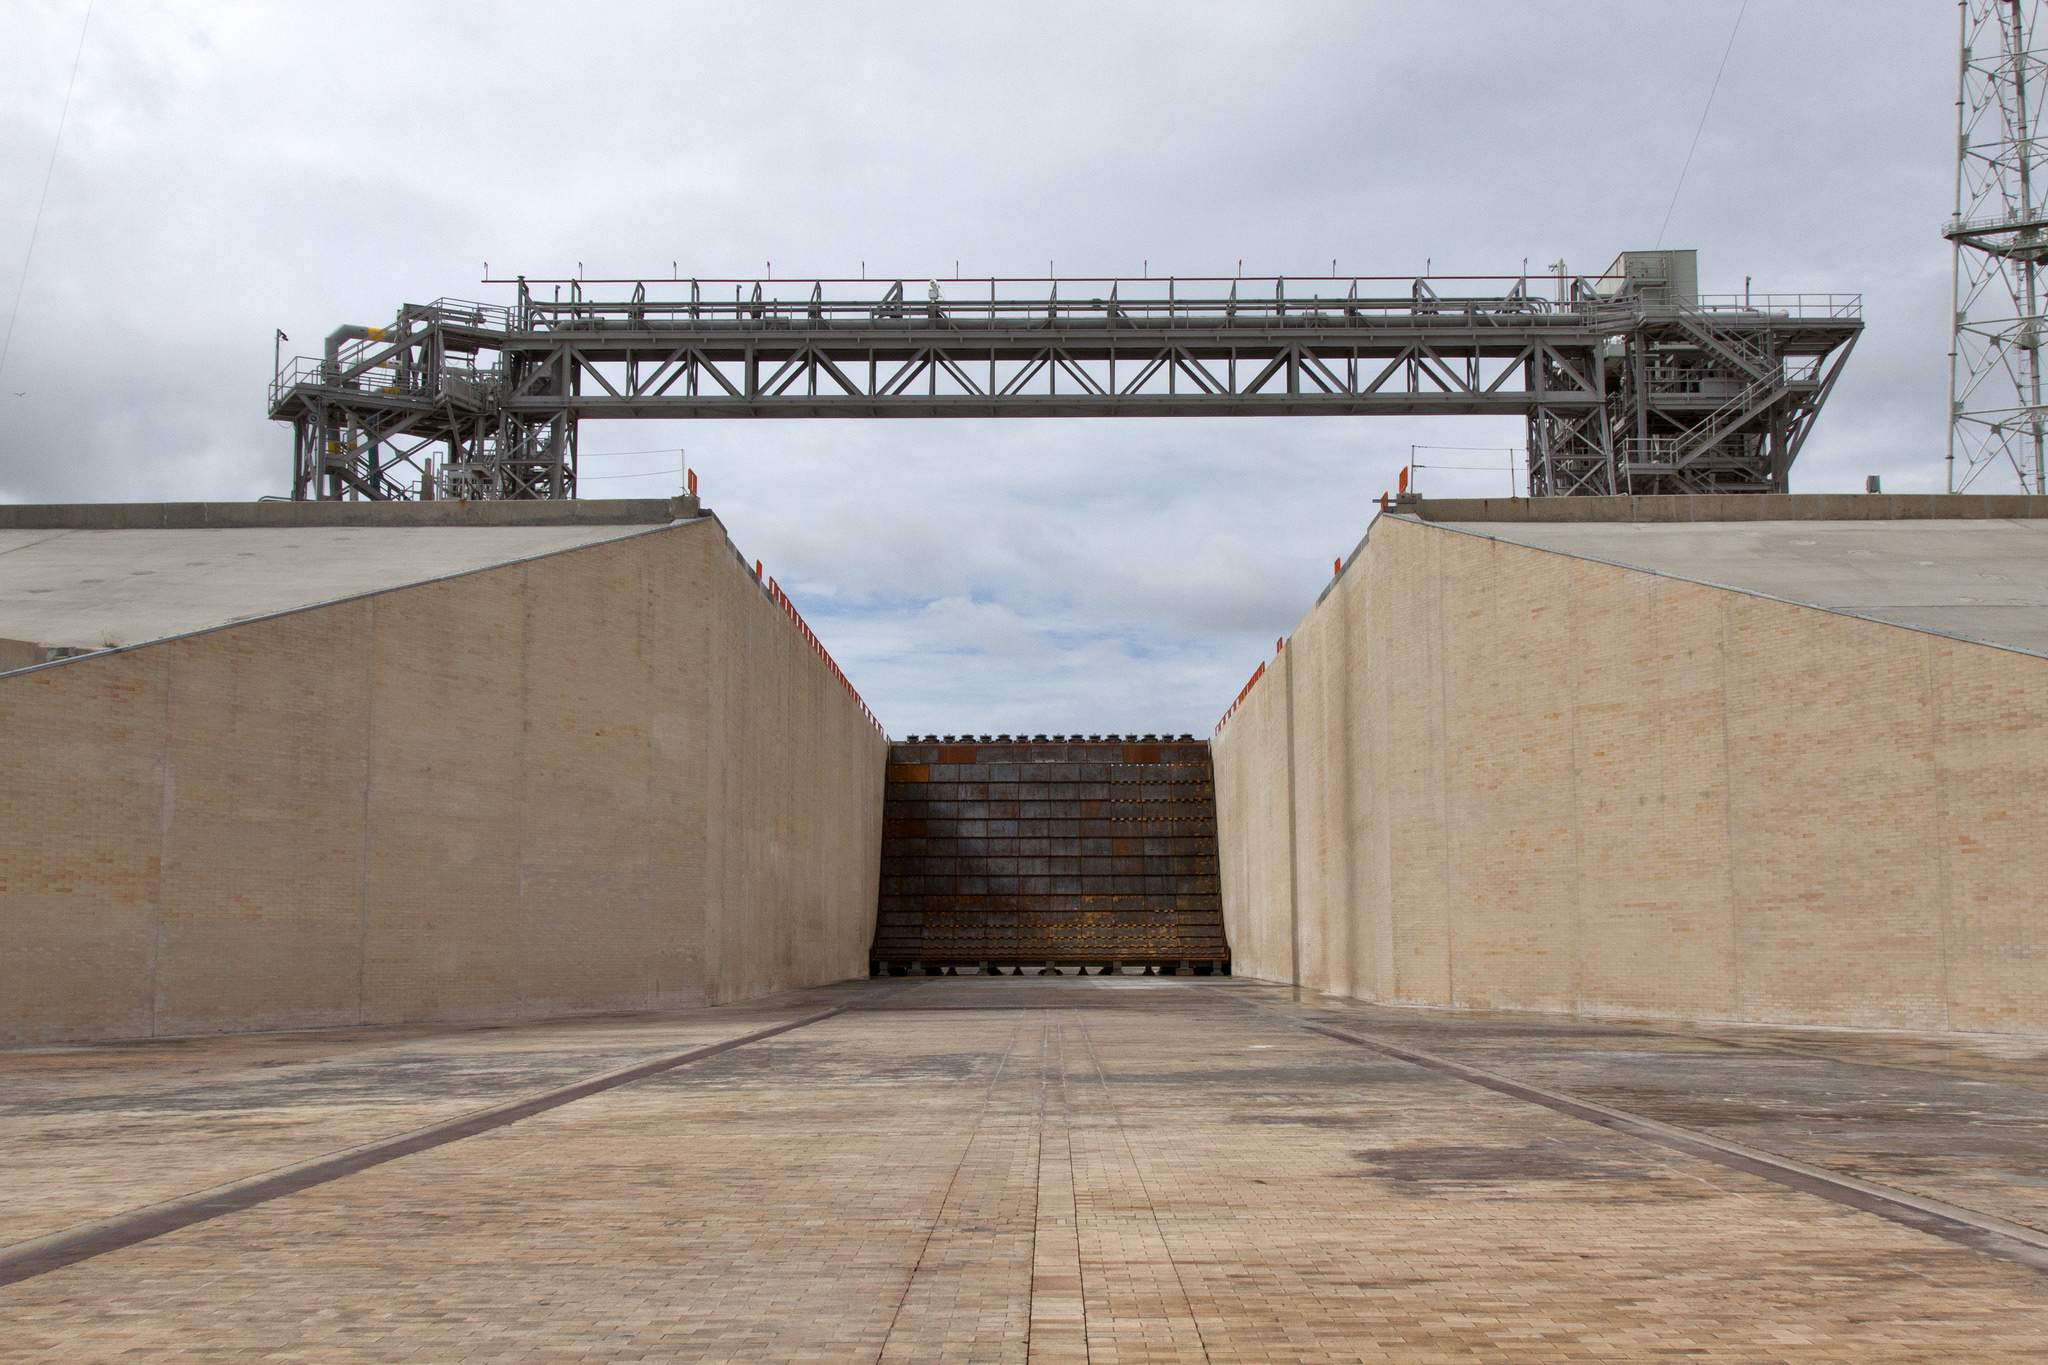 The main flame deflector is installed in the flame trench at Launch Pad 39B at Kennedy Space Center in Florida.